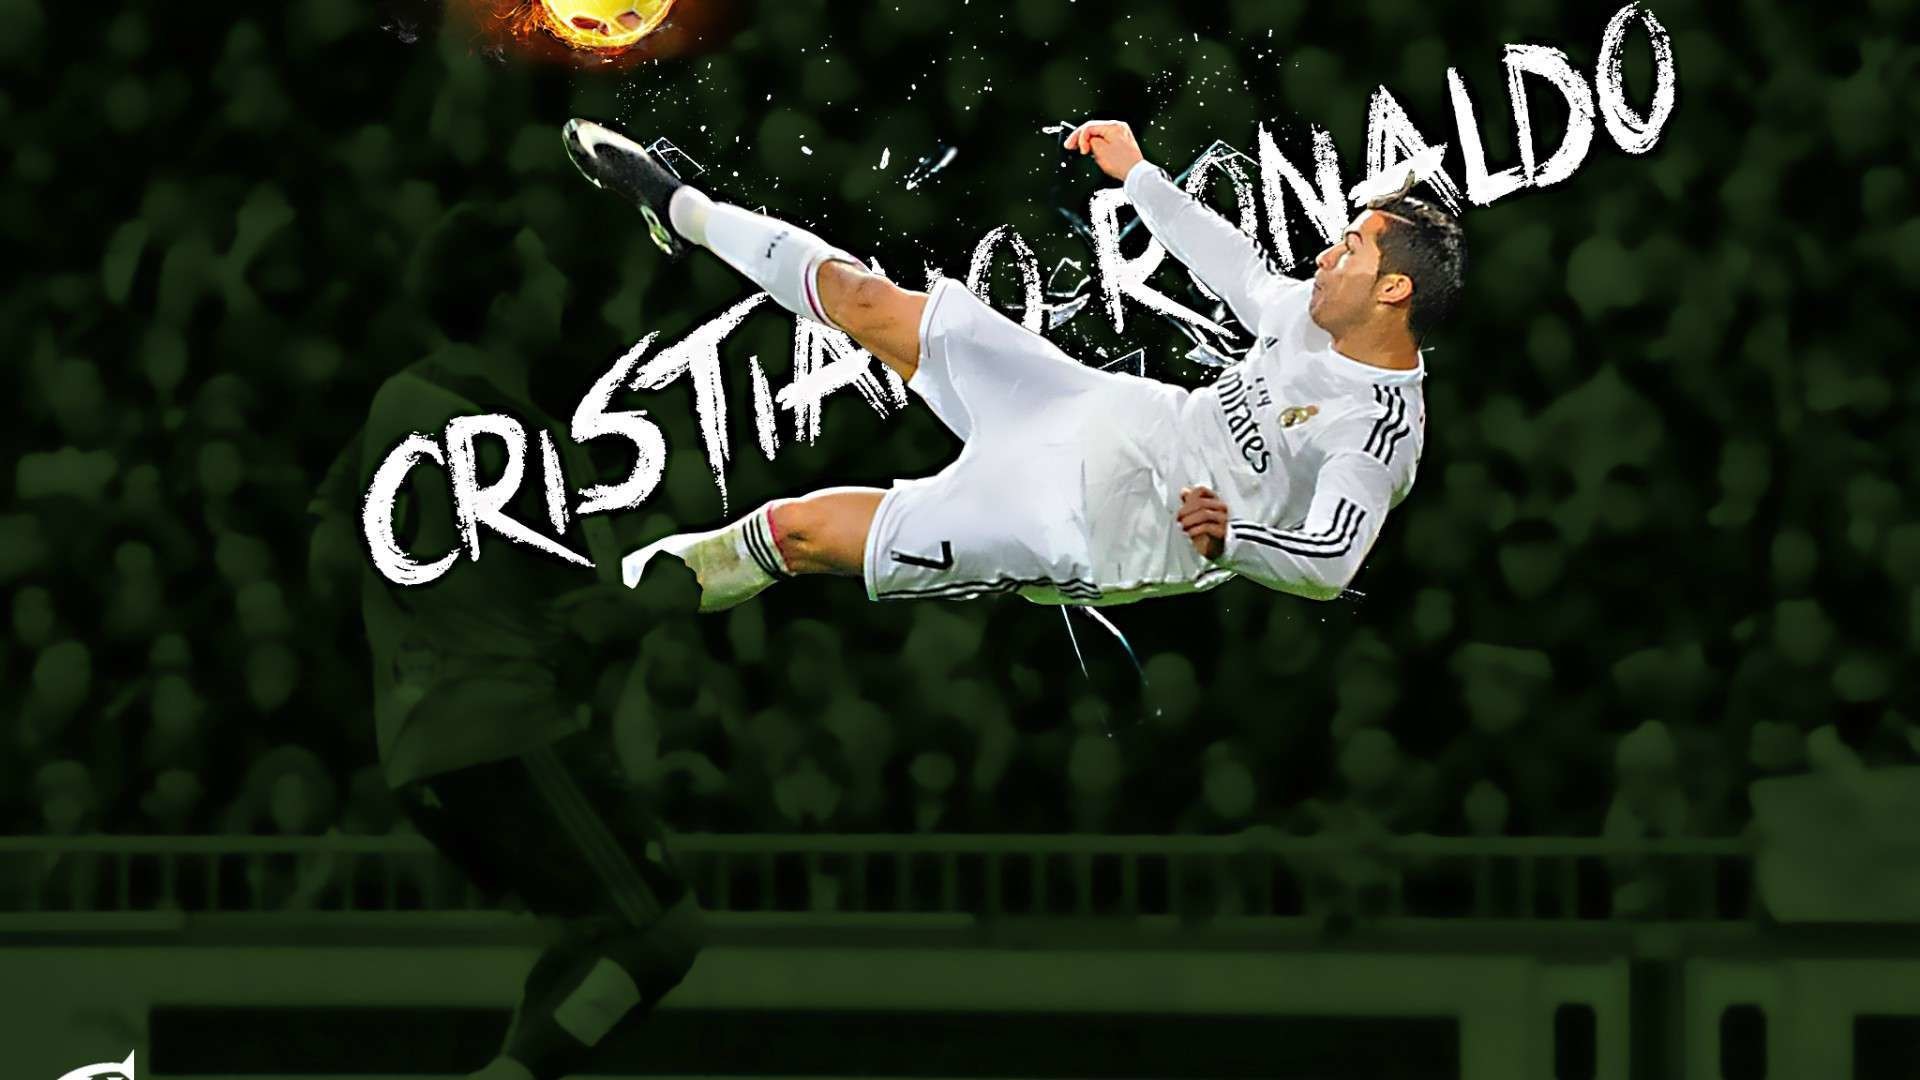 1920x1080 CR7 Wallpapers HD